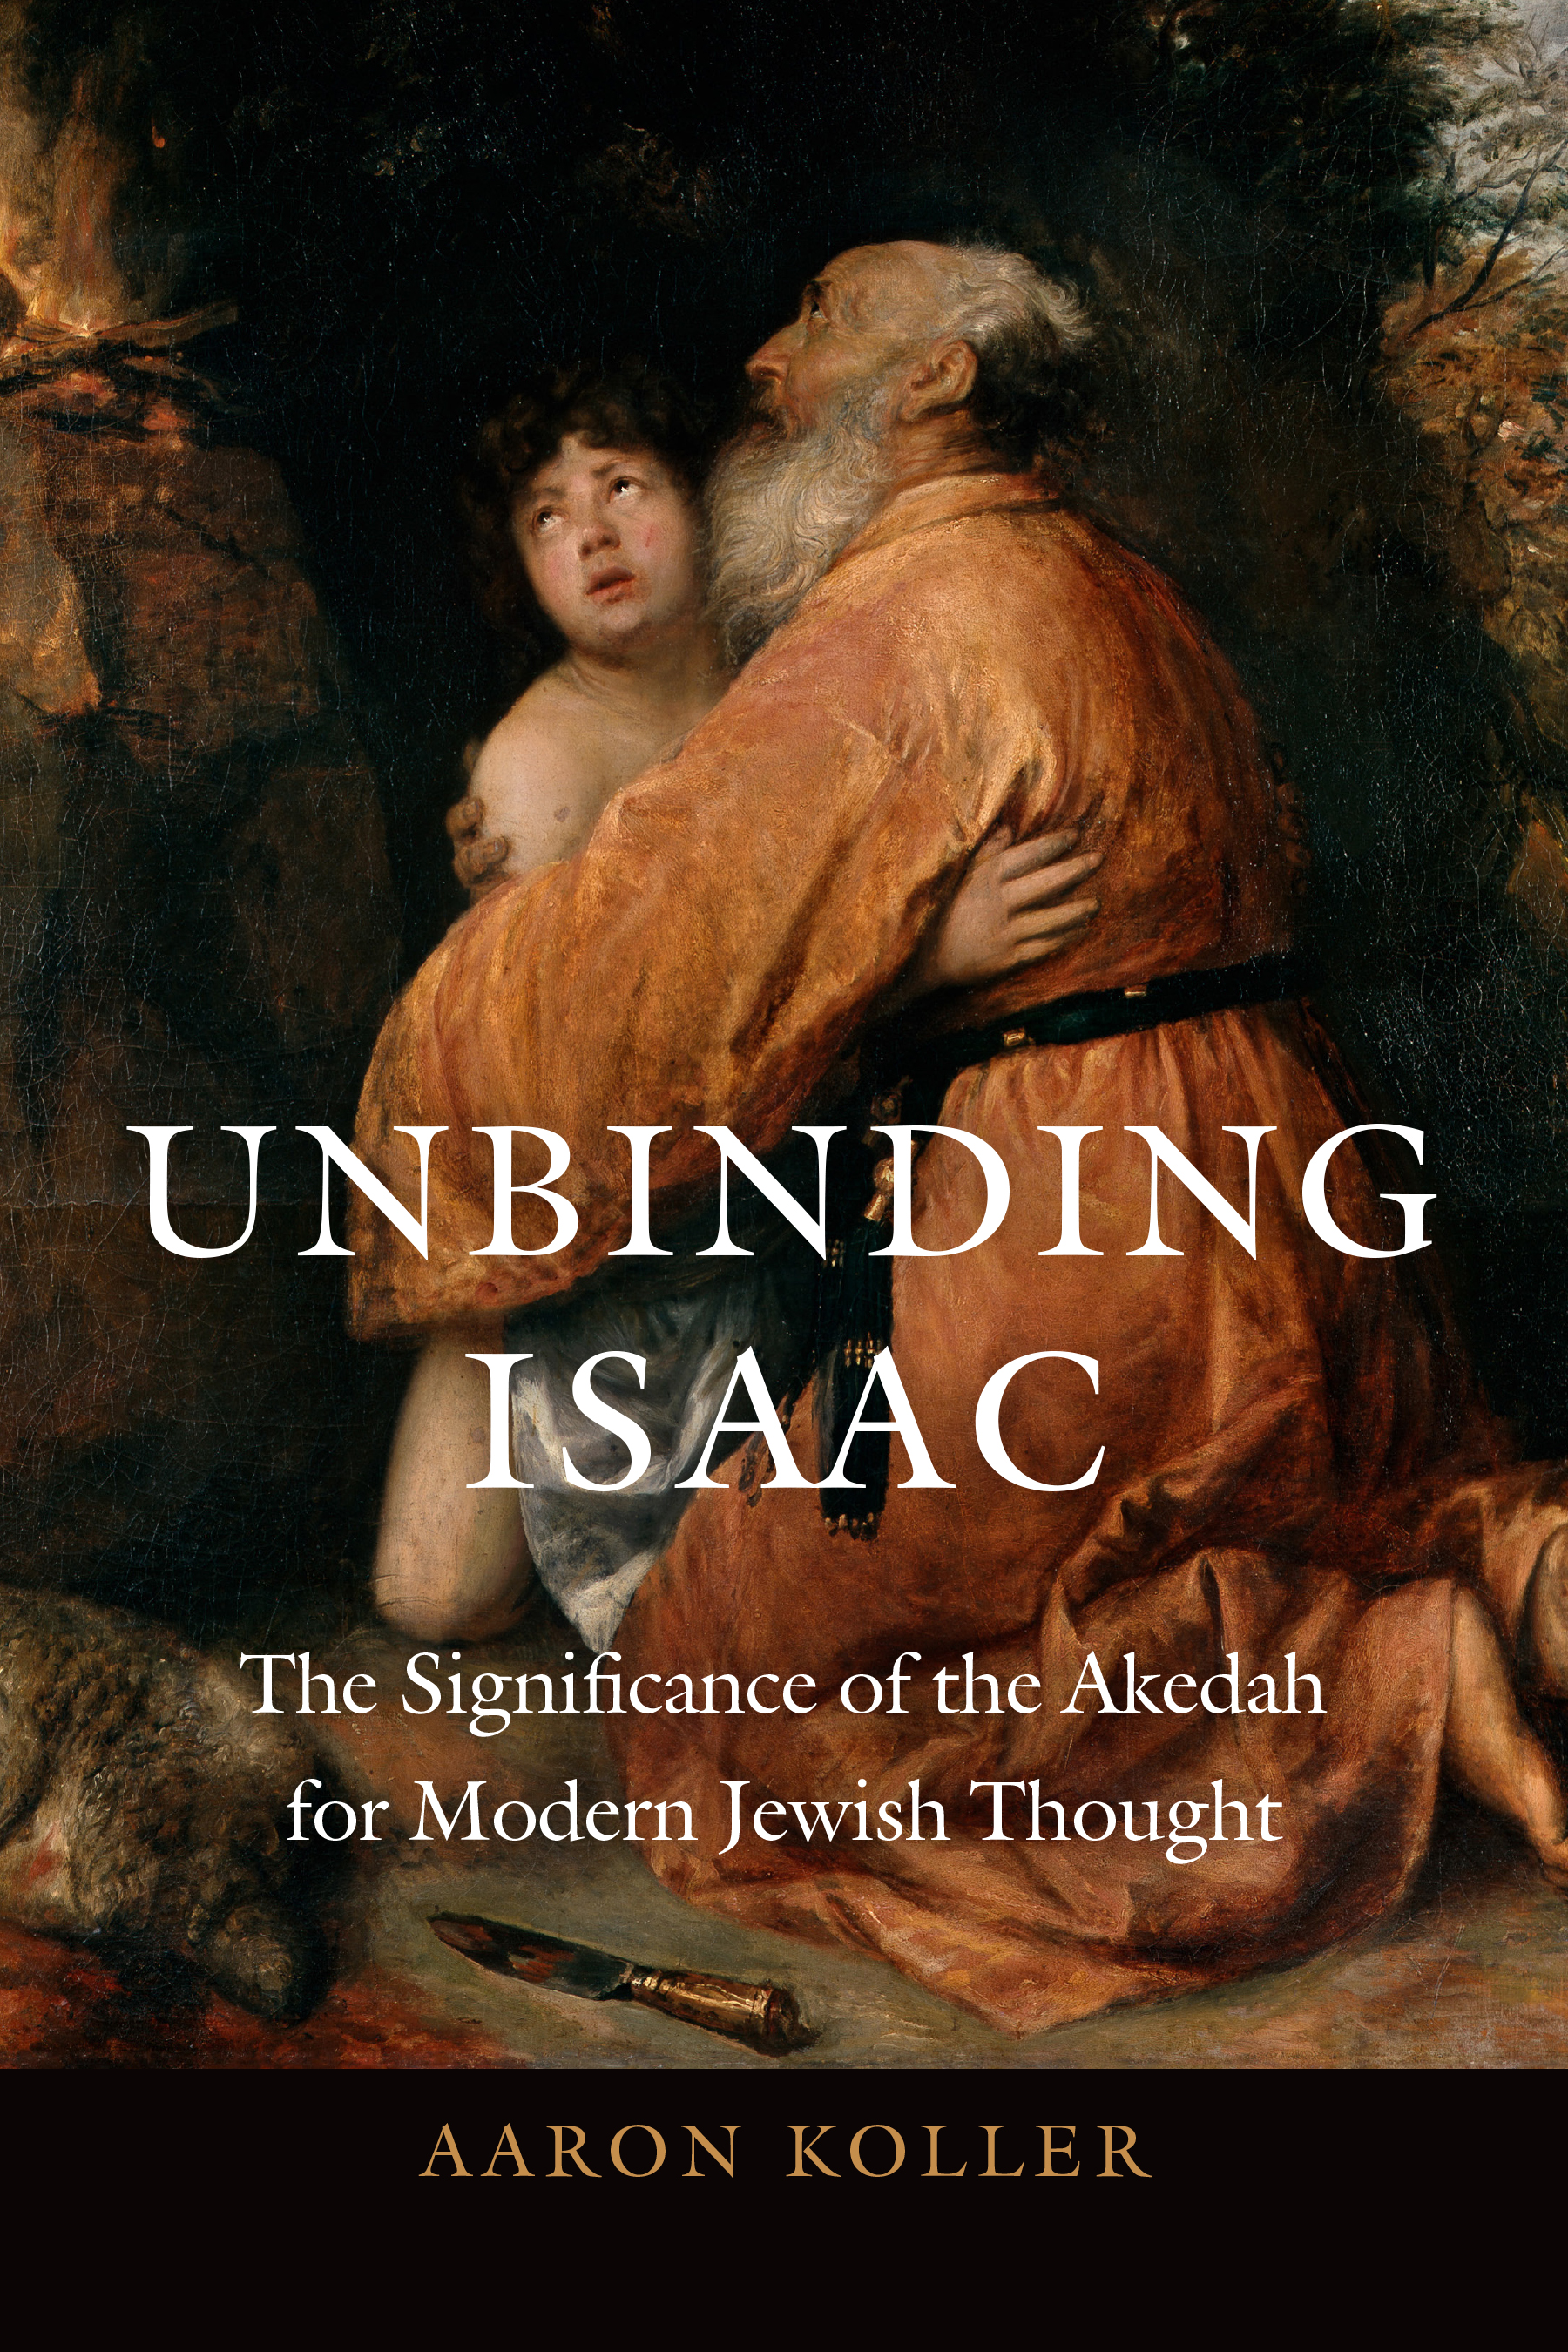 LIBRARY BOOK TALK | Aaron Koller on Unbinding Isaac: The Significance of the Akedah for Modern Jewish Thought